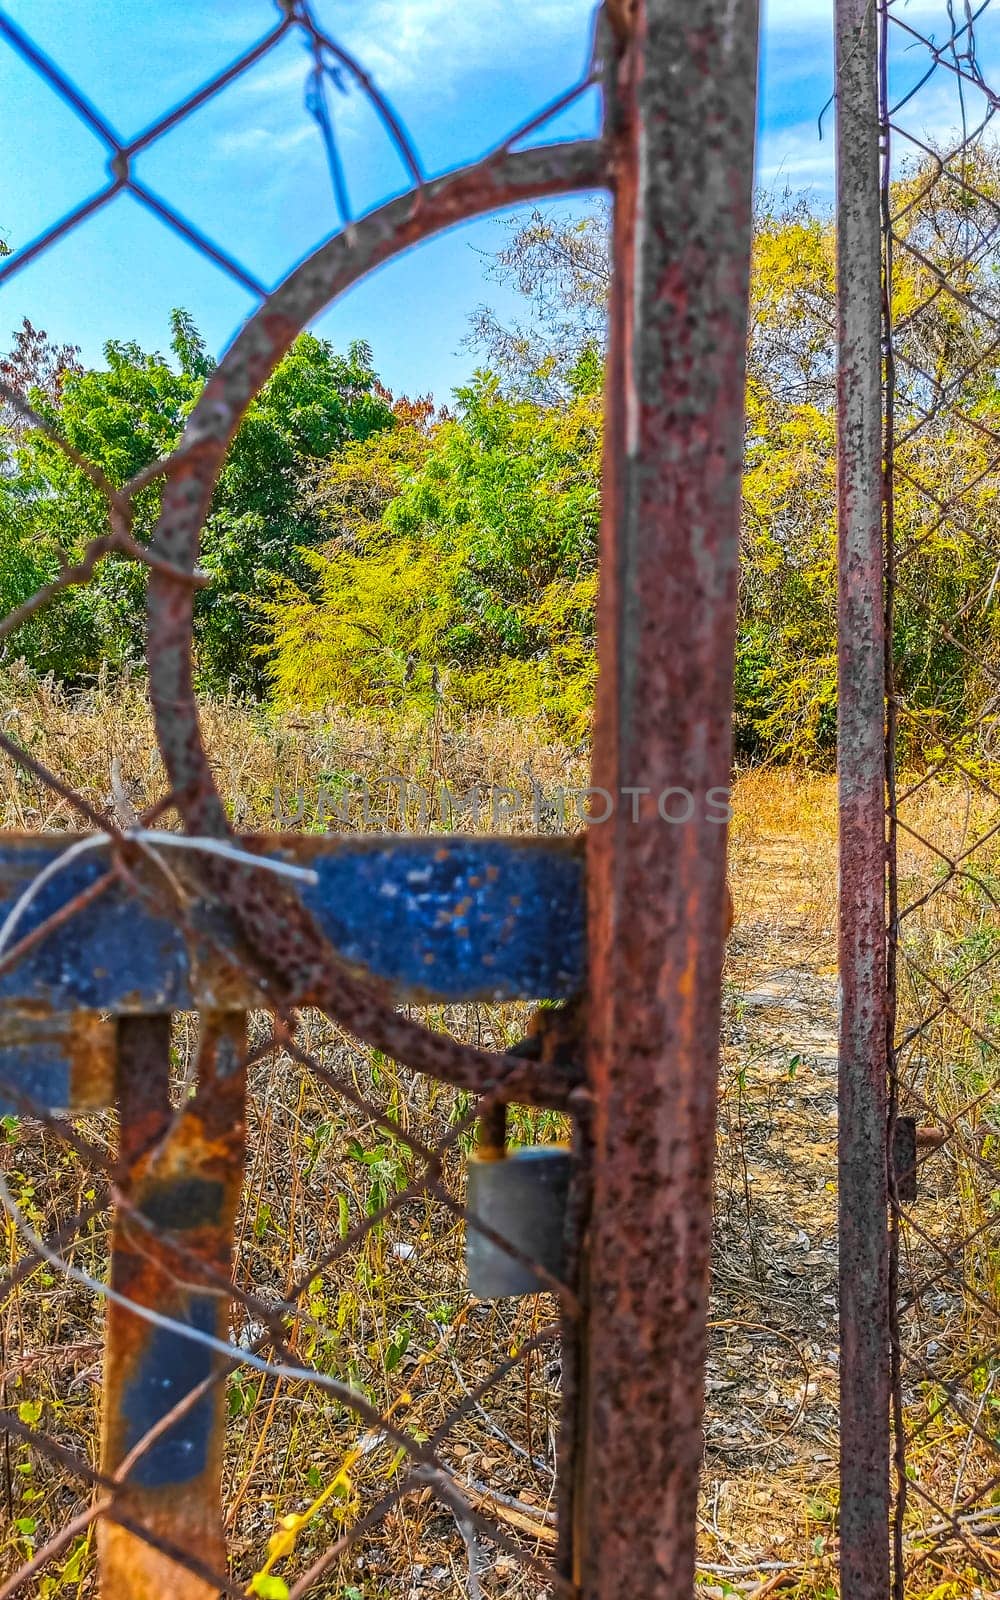 Nature jungle and forest behind rusty fence and gate in Zicatela Puerto Escondido Oaxaca Mexico.